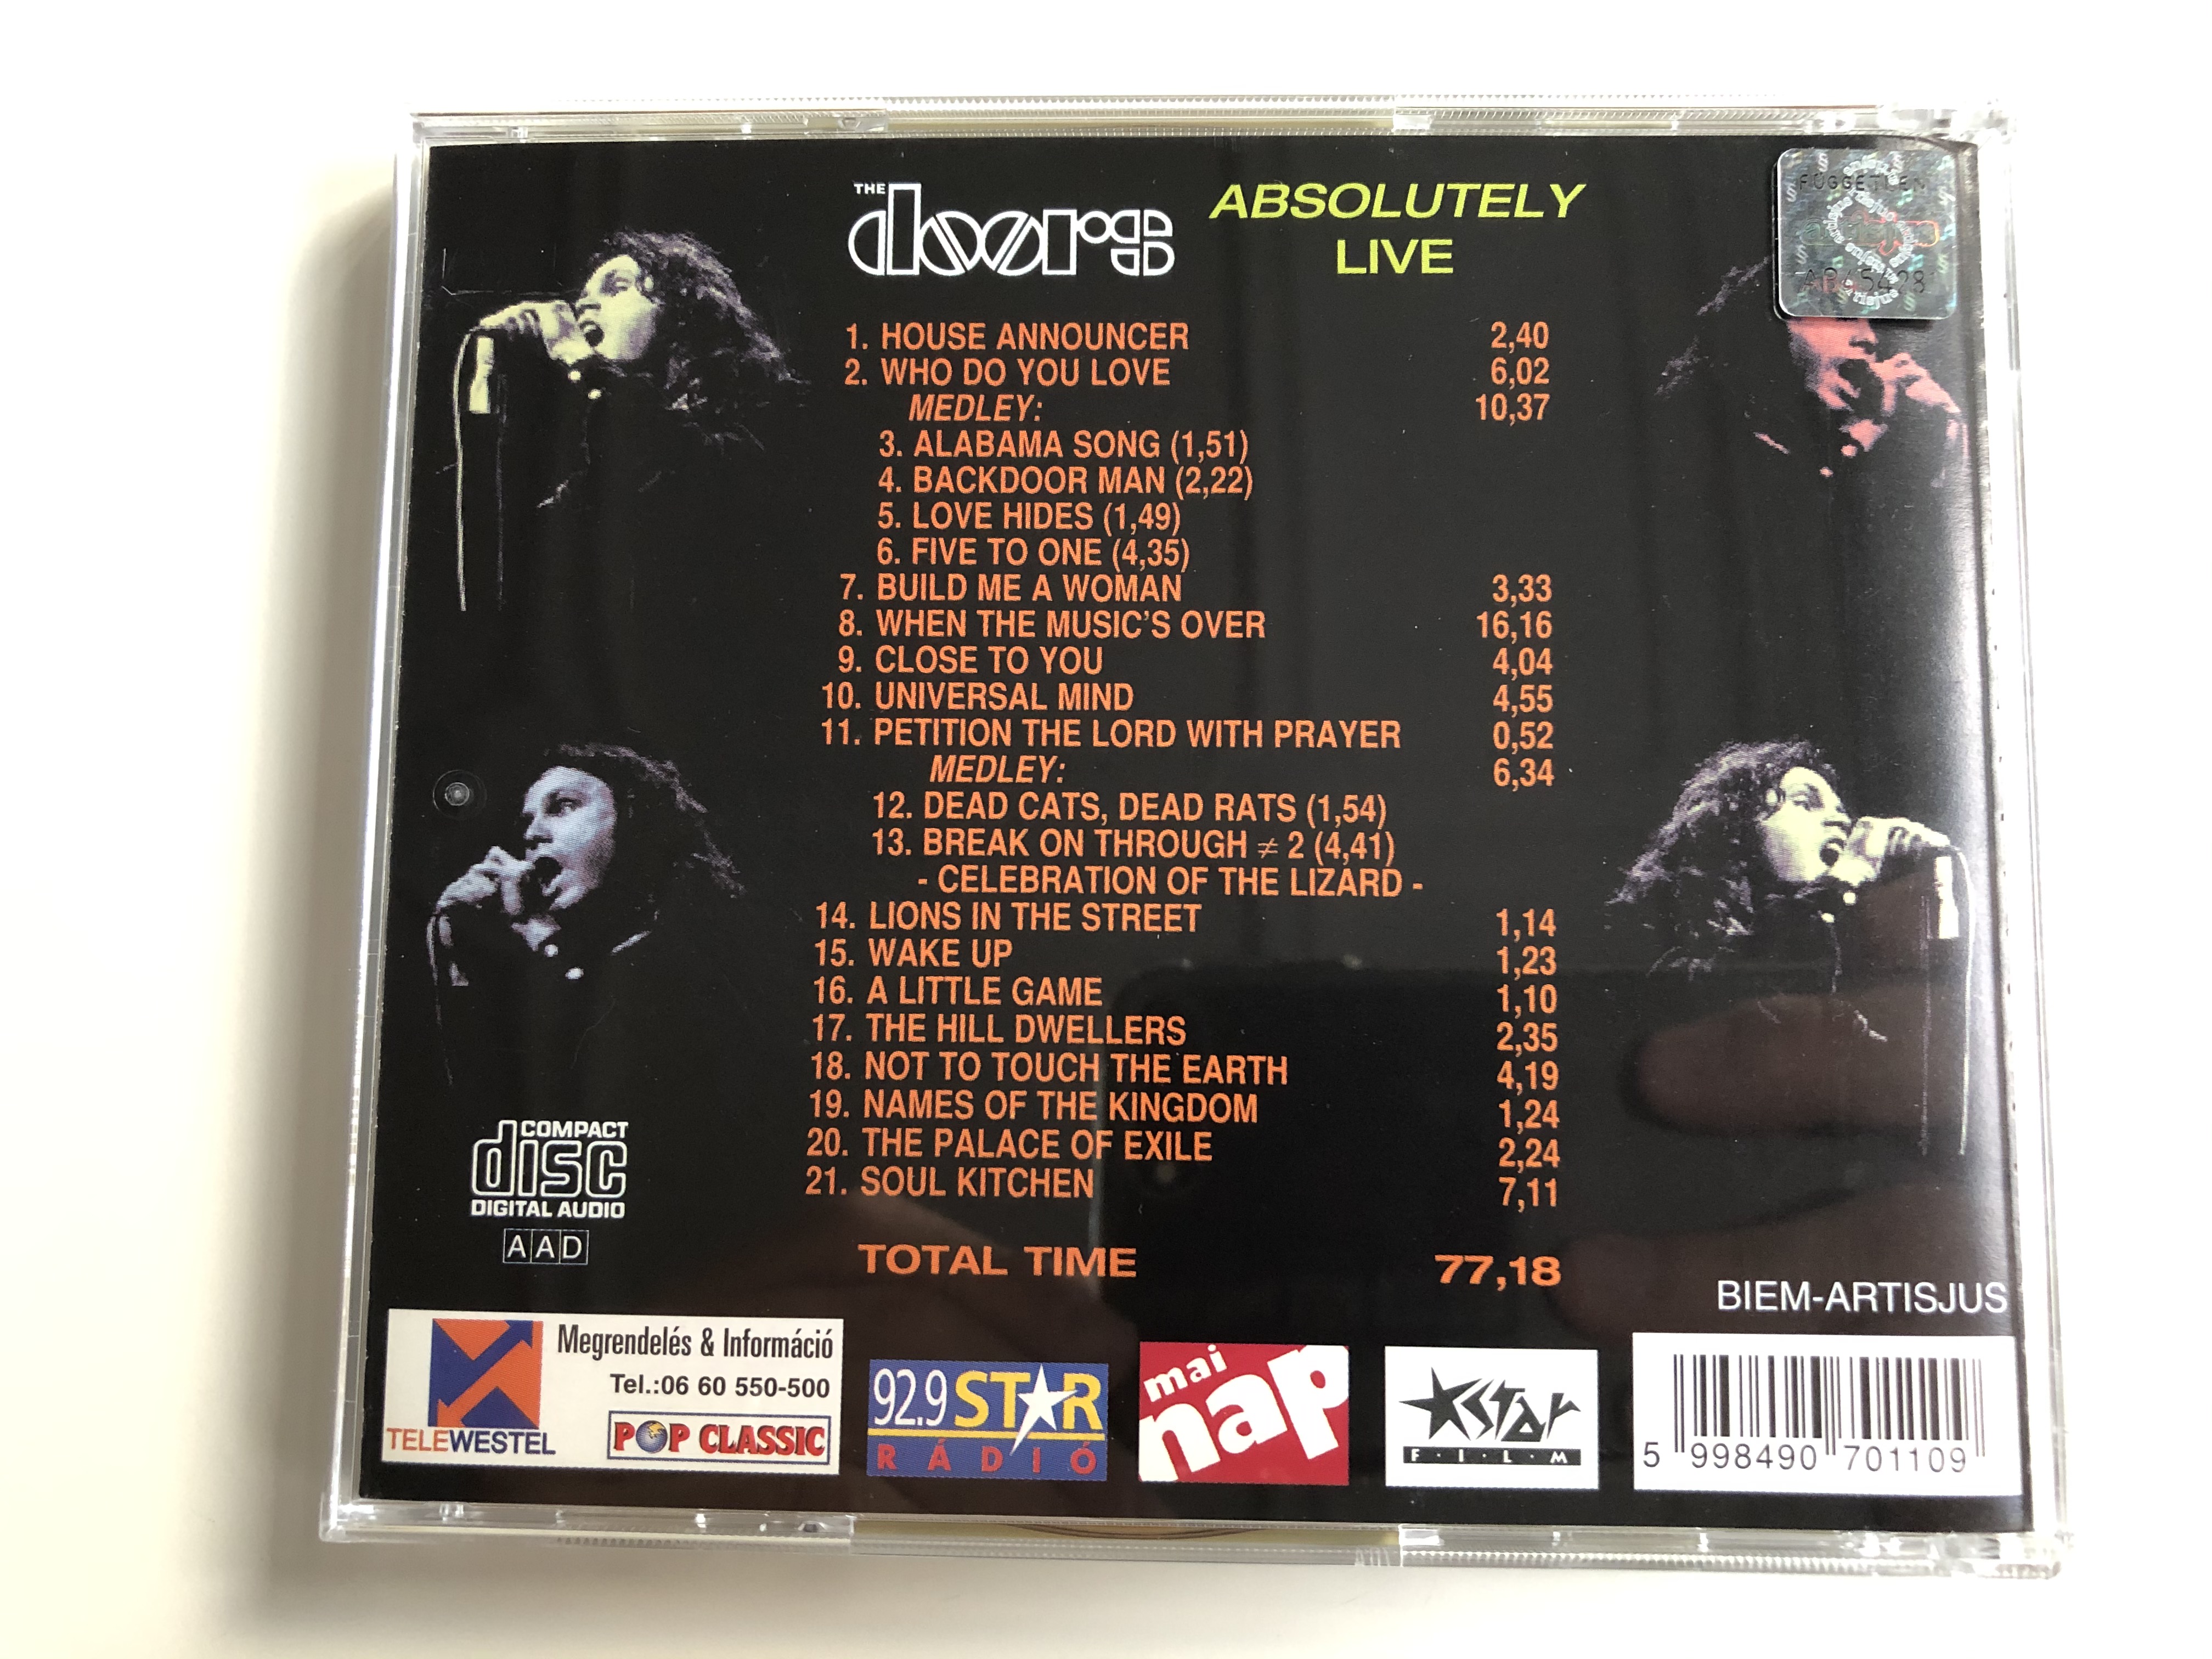 the-doors-absolutely-live-total-time-77-18-pop-classic-euroton-audio-cd-eucd-0110-4-.jpg